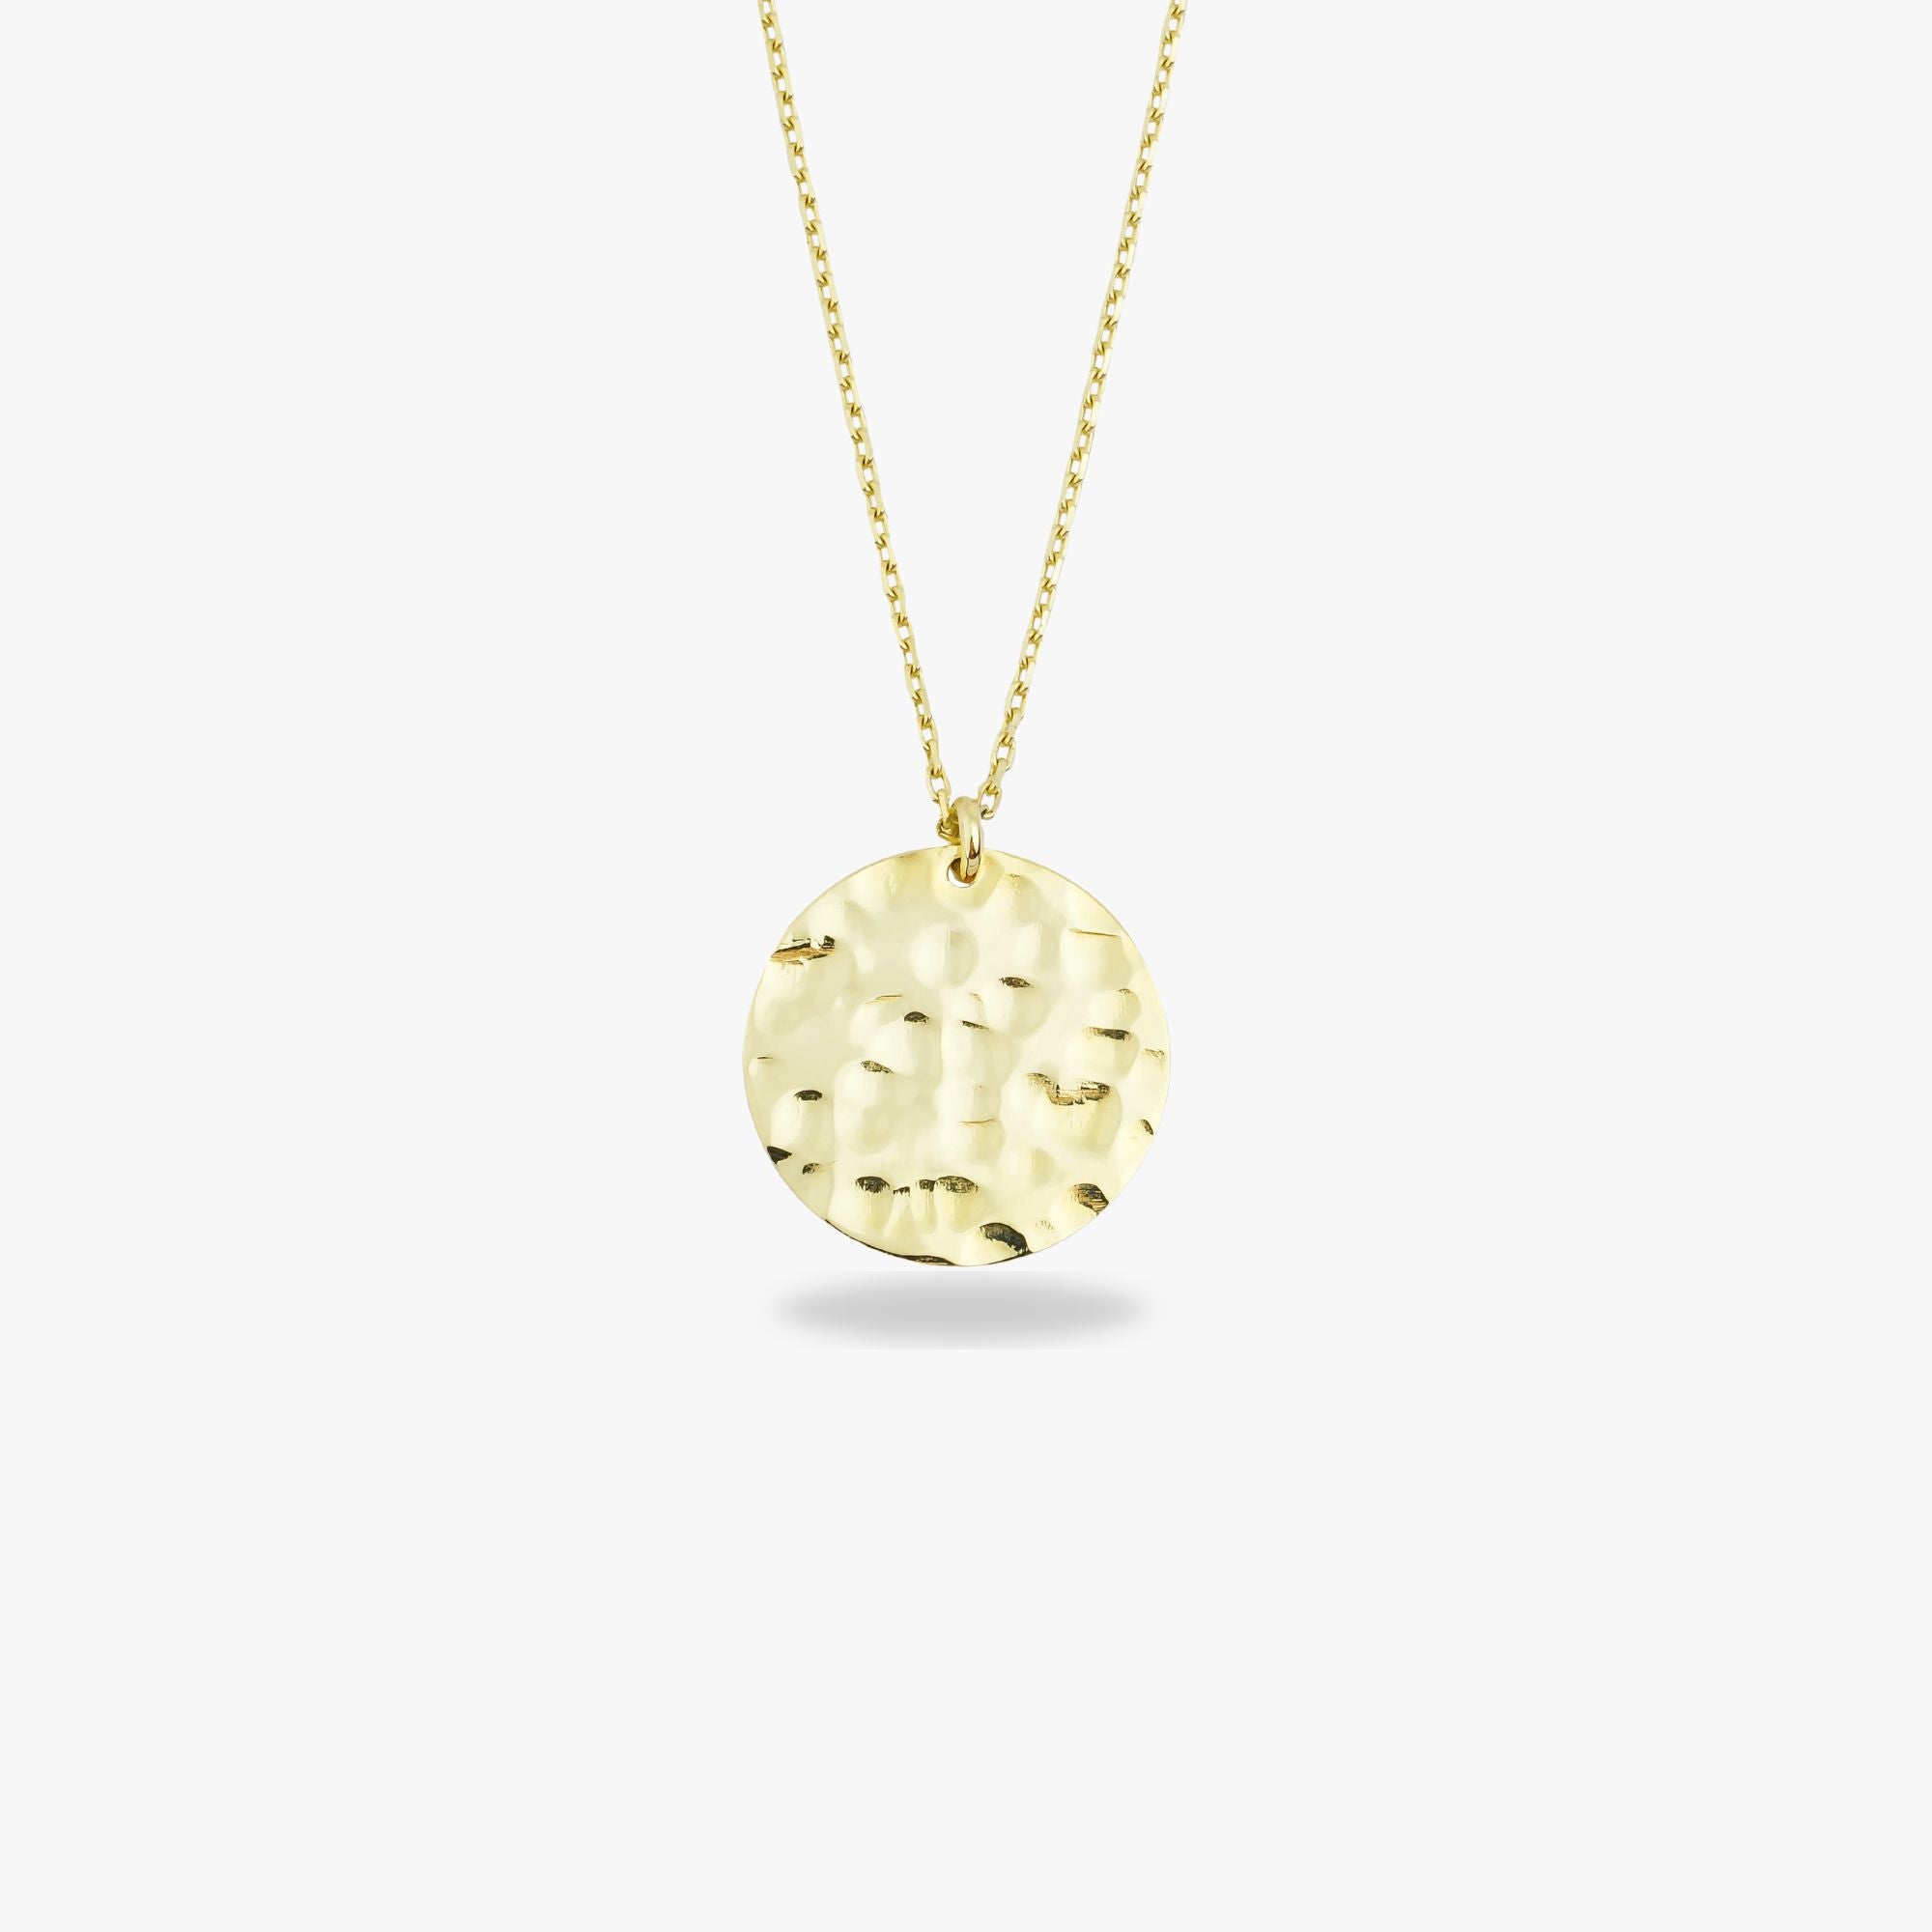 Hand Hammered Gold Disc Necklace in 14K Gold